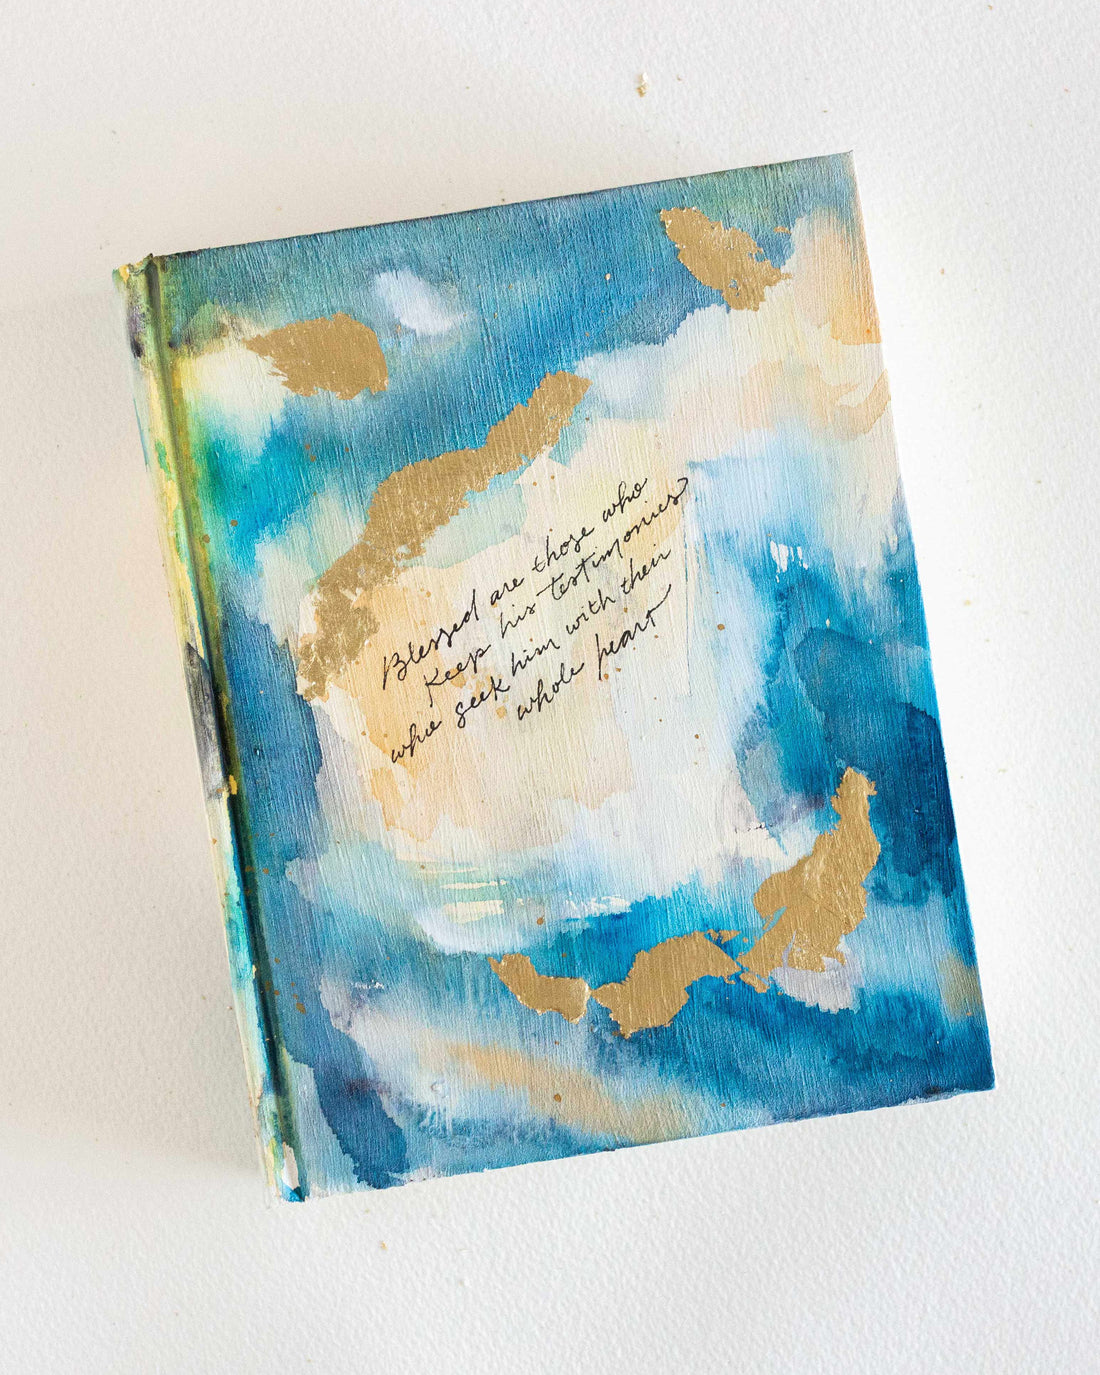 Psalm 119:2, “Blessed Are Those Who Keep His Testimonies” Hand-painted Watercolor Bible